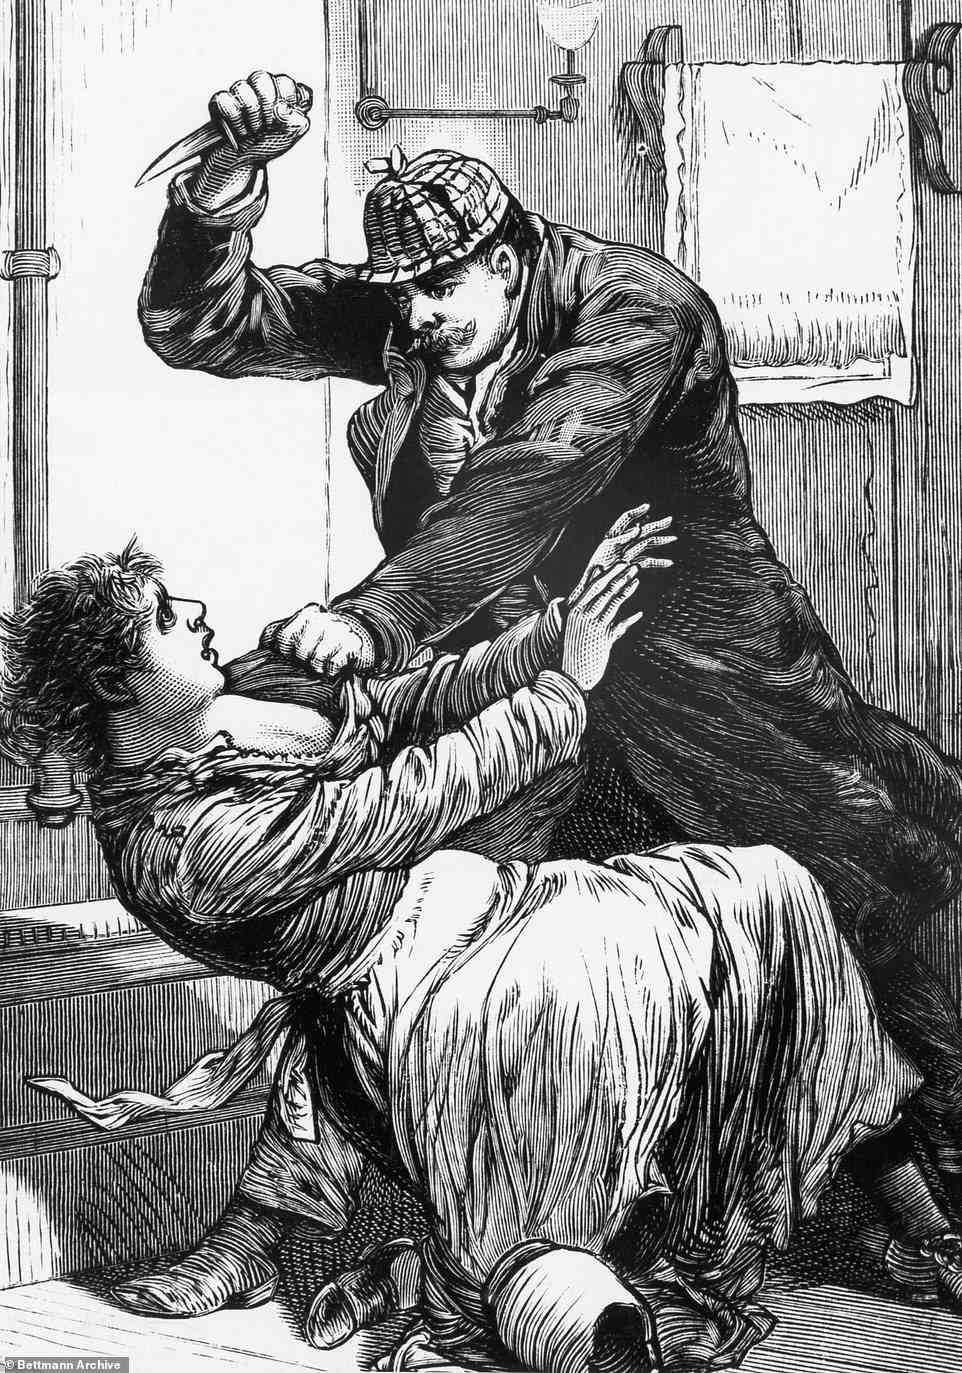 The Ripper is believed to have killed six women in 1888 but was never identified, sparking dozens of books on the subject and the naming of numerous suspects